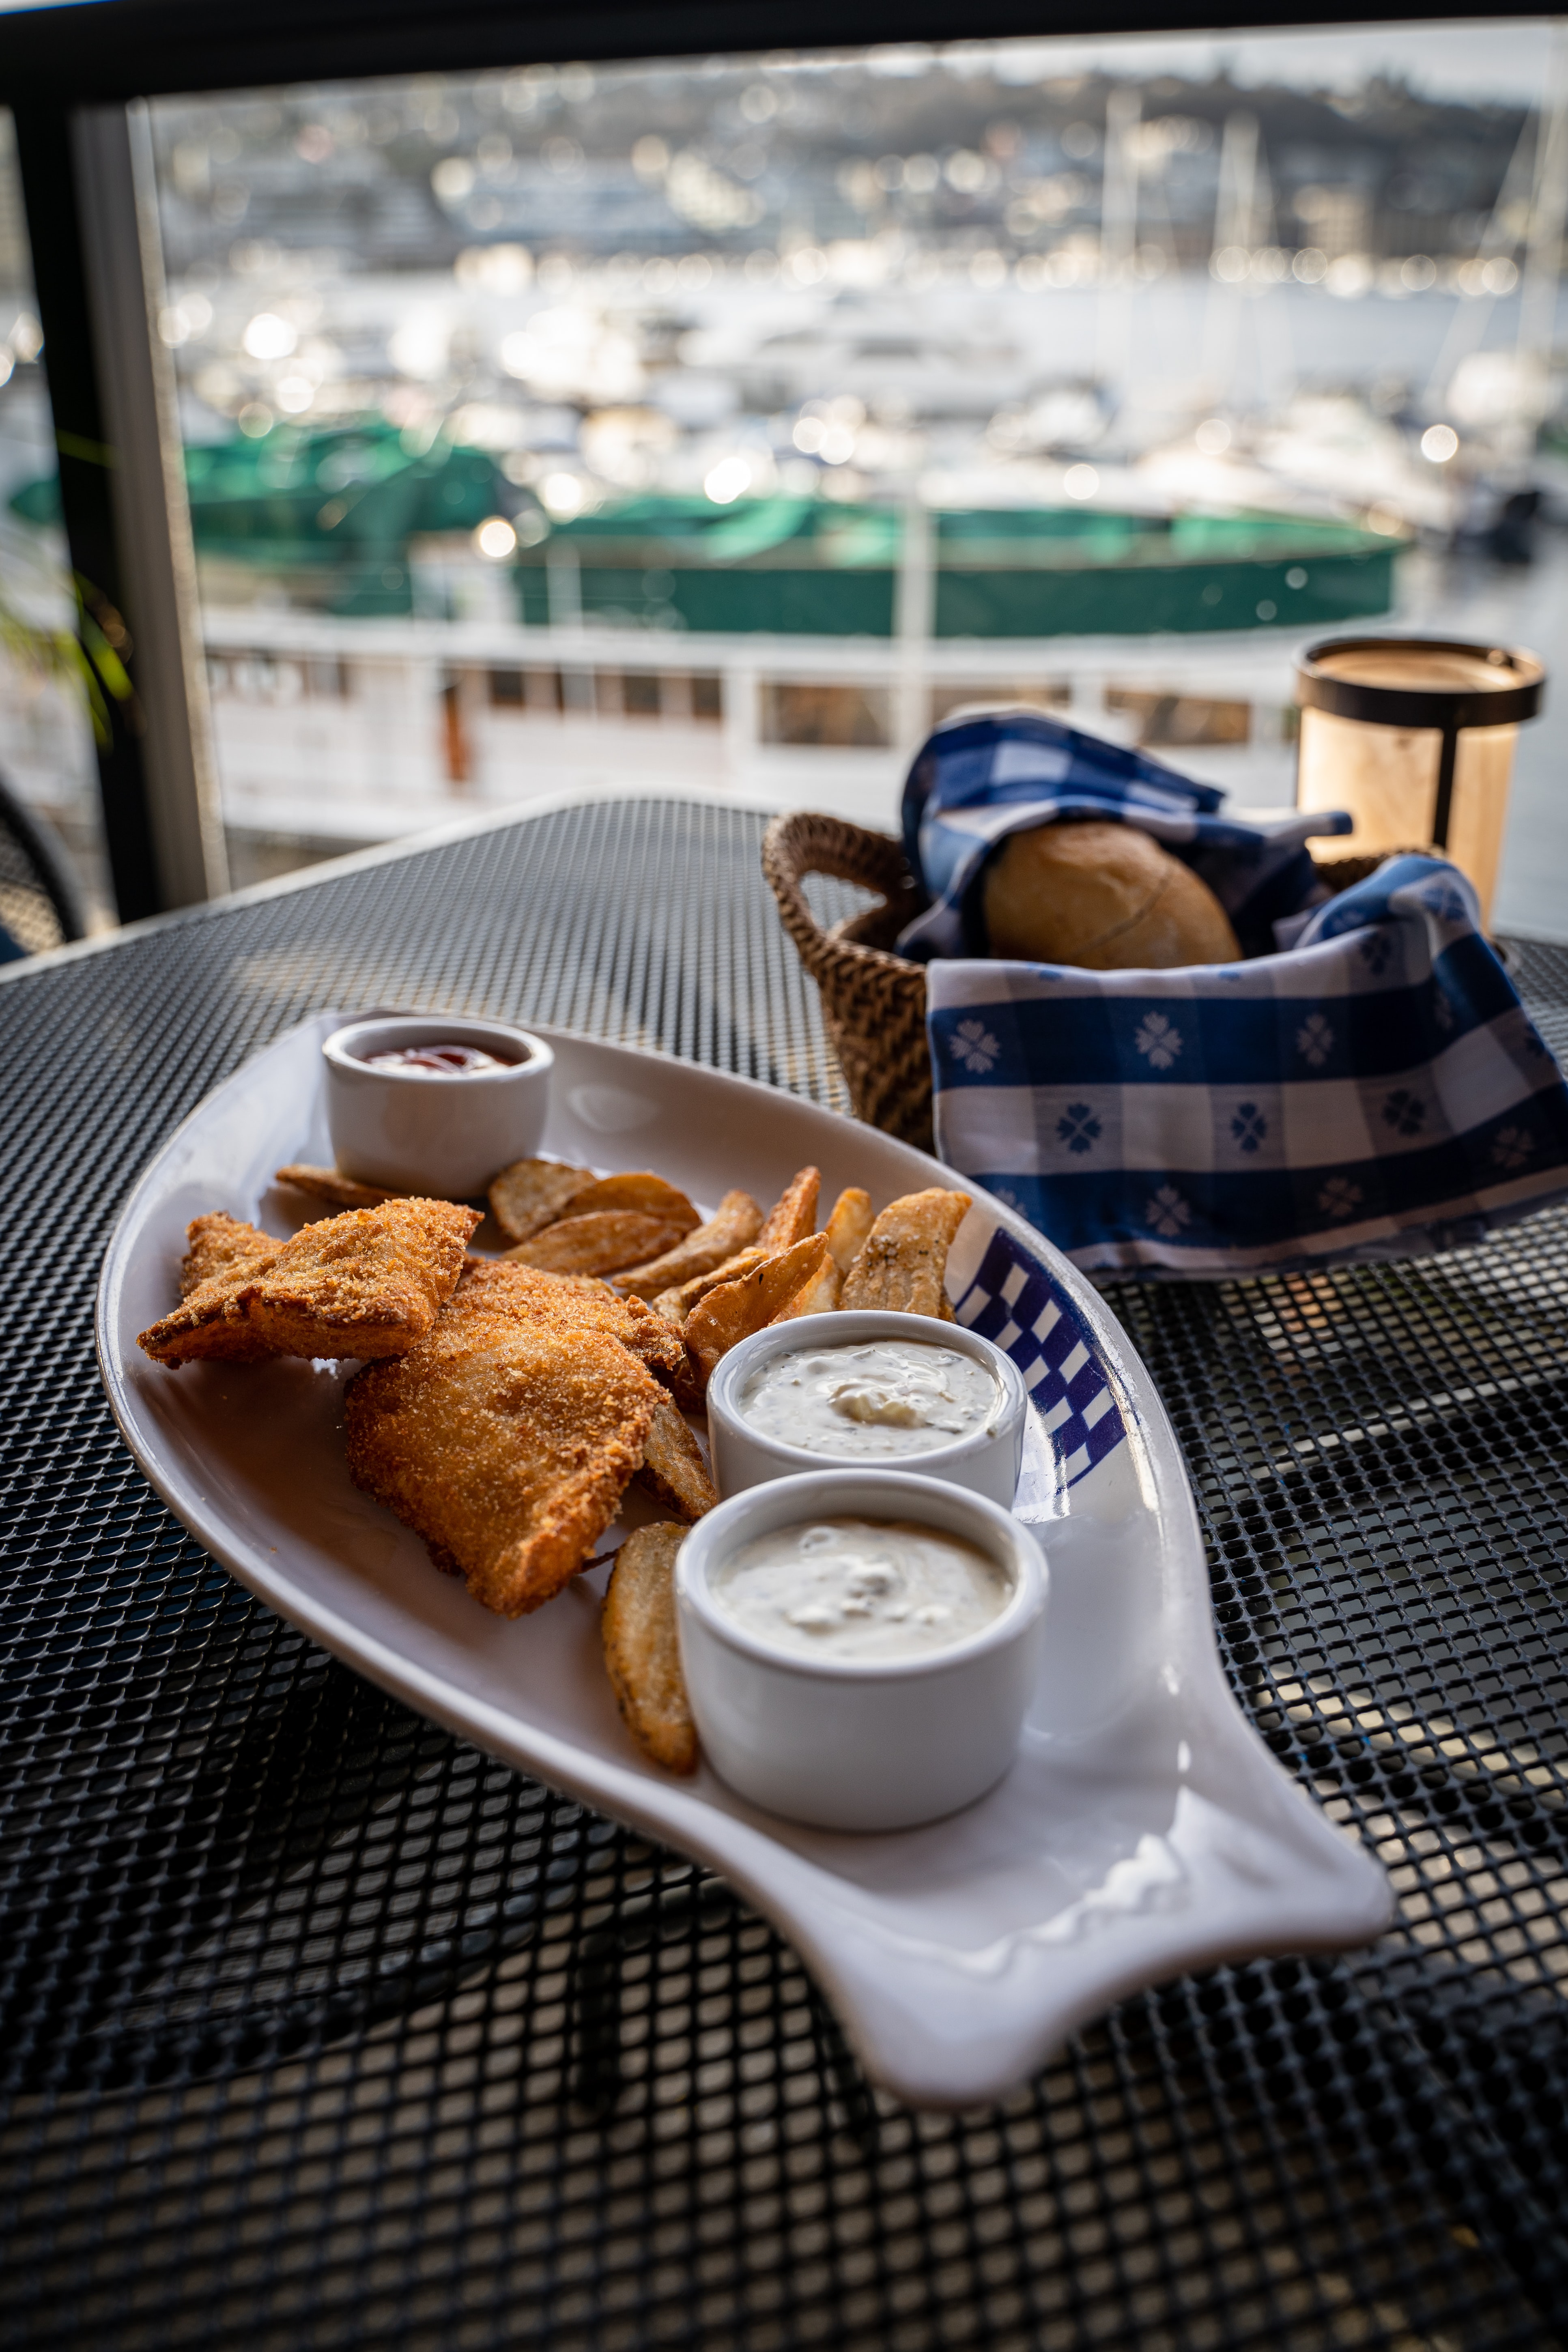 fish and chips by Alexandra Tran on Unsplash